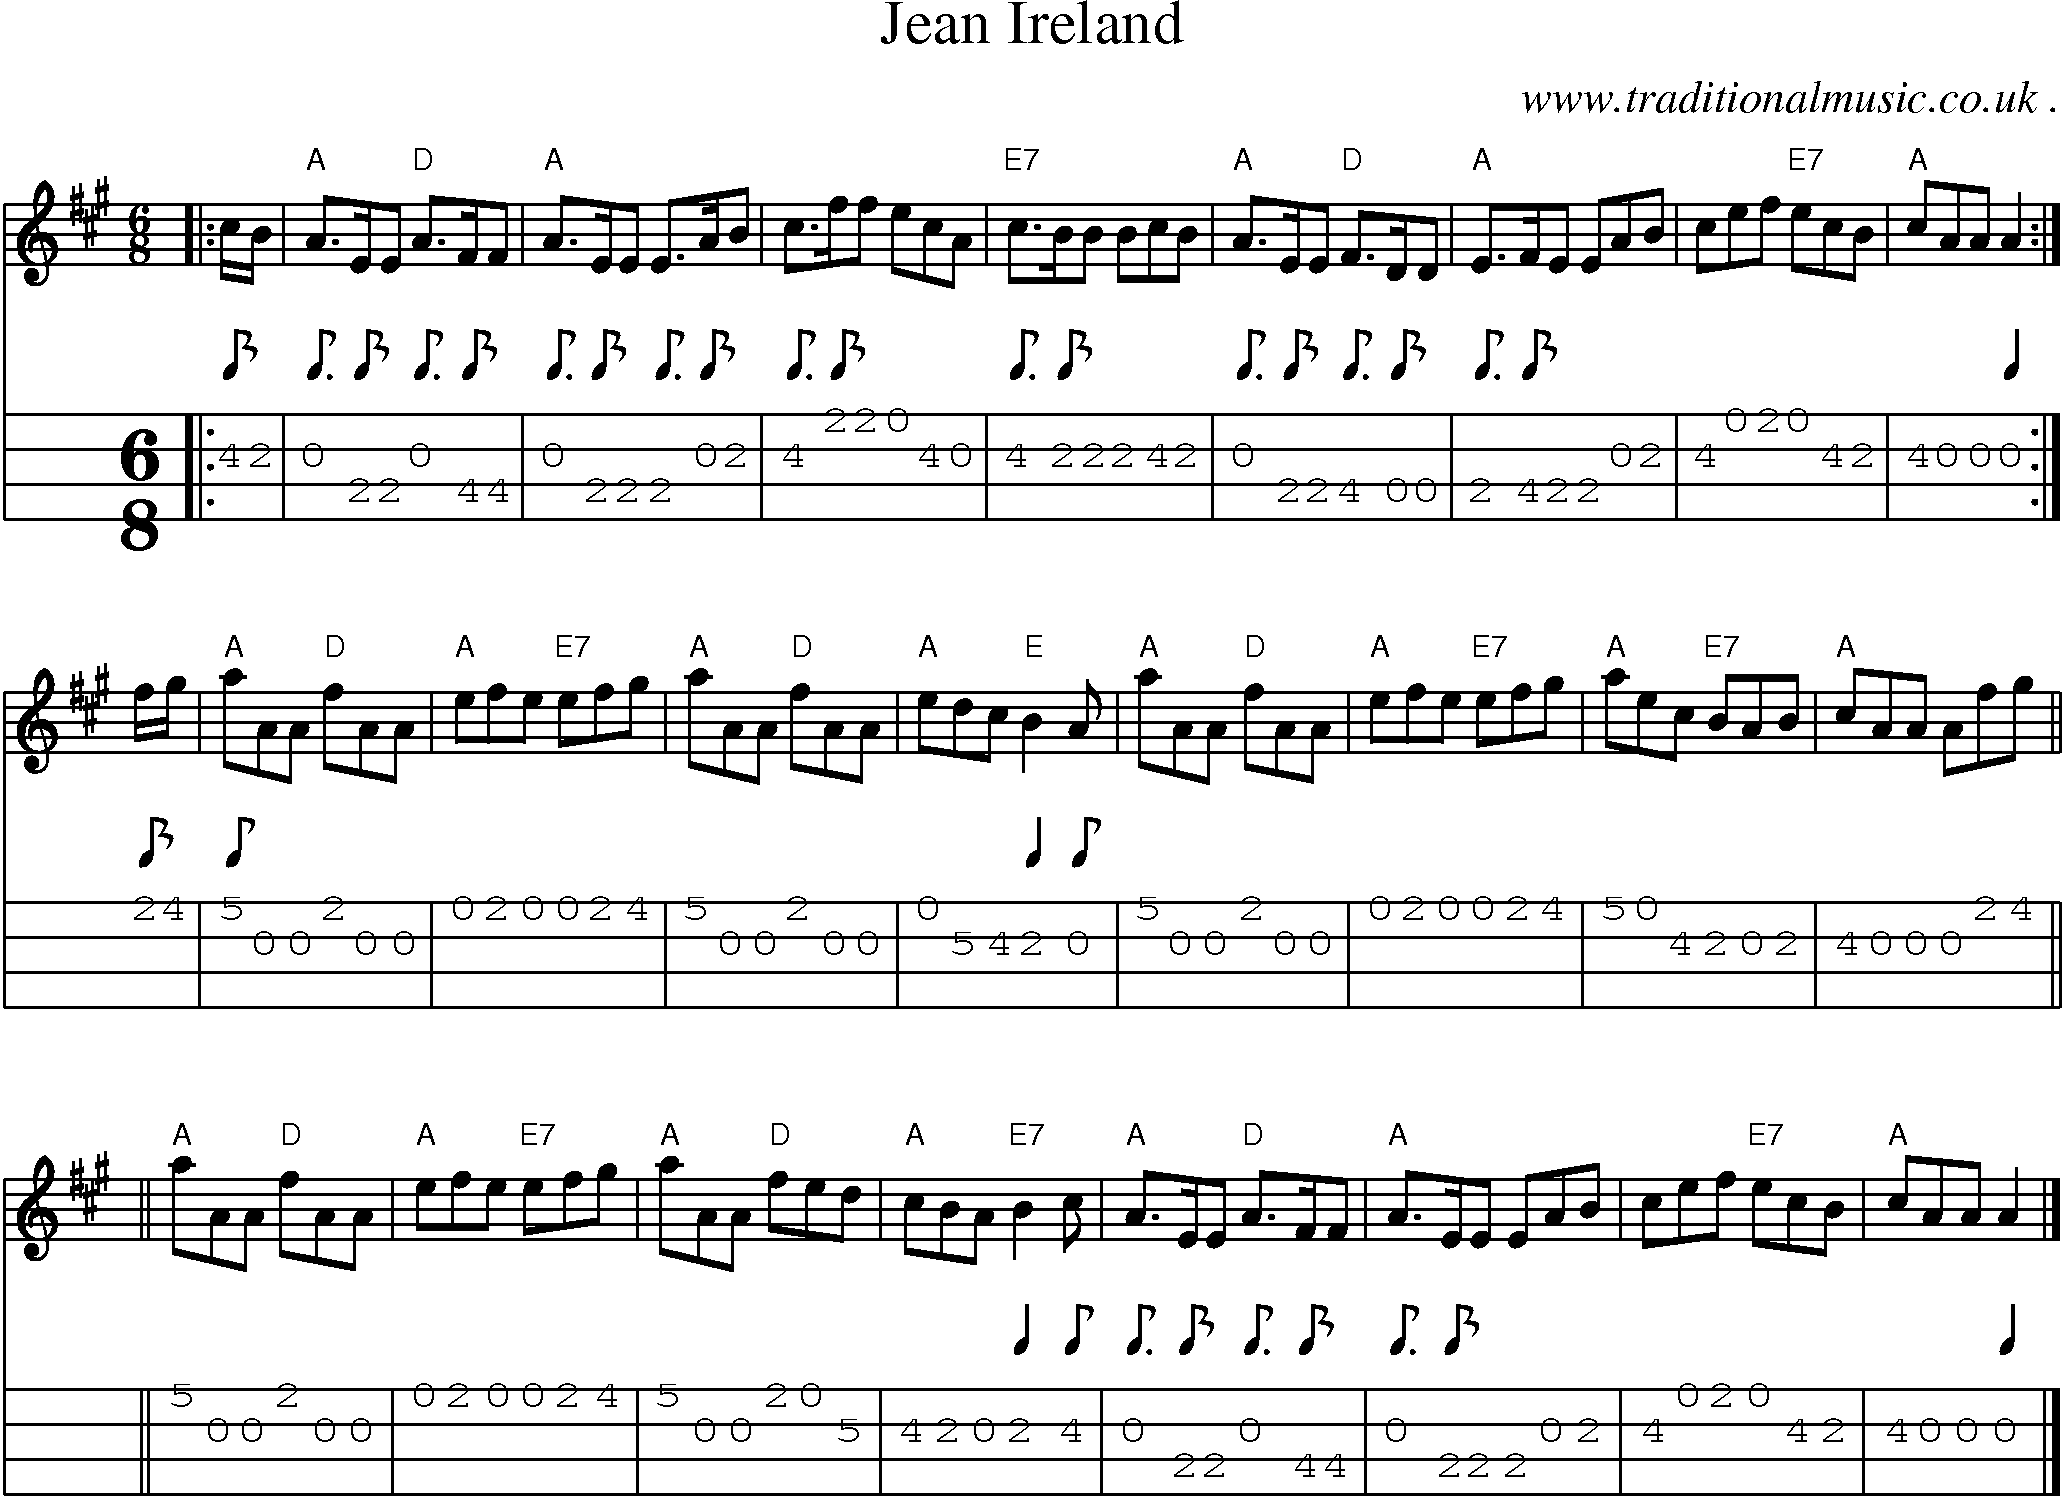 Sheet-music  score, Chords and Mandolin Tabs for Jean Ireland